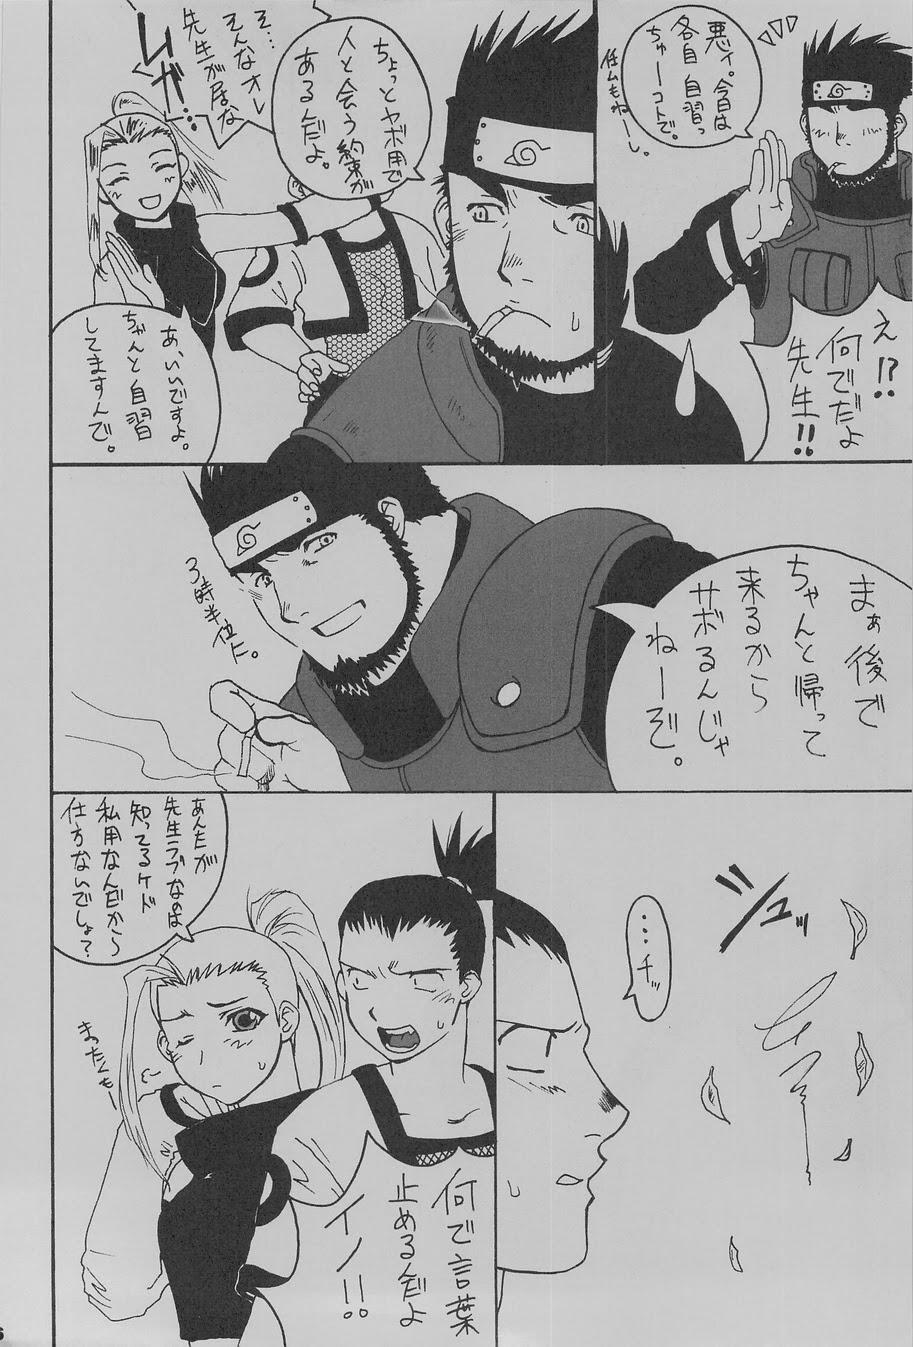 Butt Ka - it happened in the distant past - Naruto Fullmetal alchemist Gunparade march Free Rough Porn - Page 8